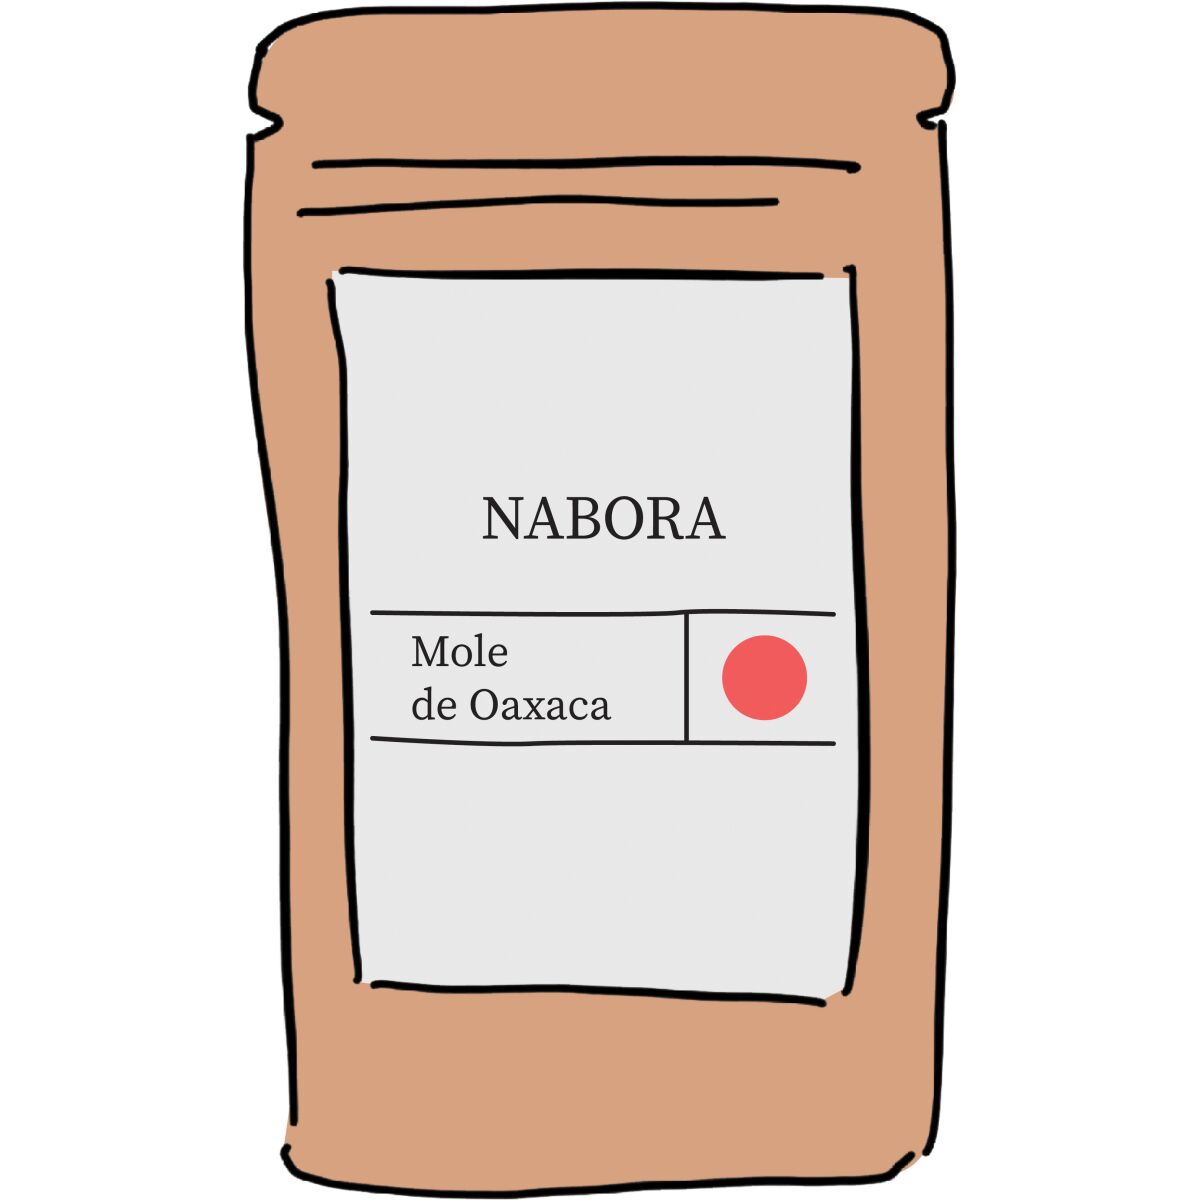 Nabora from Oaxaca is a mixture of dried ground ingredients plus a tablet of unsweetened Mexican chocolate.